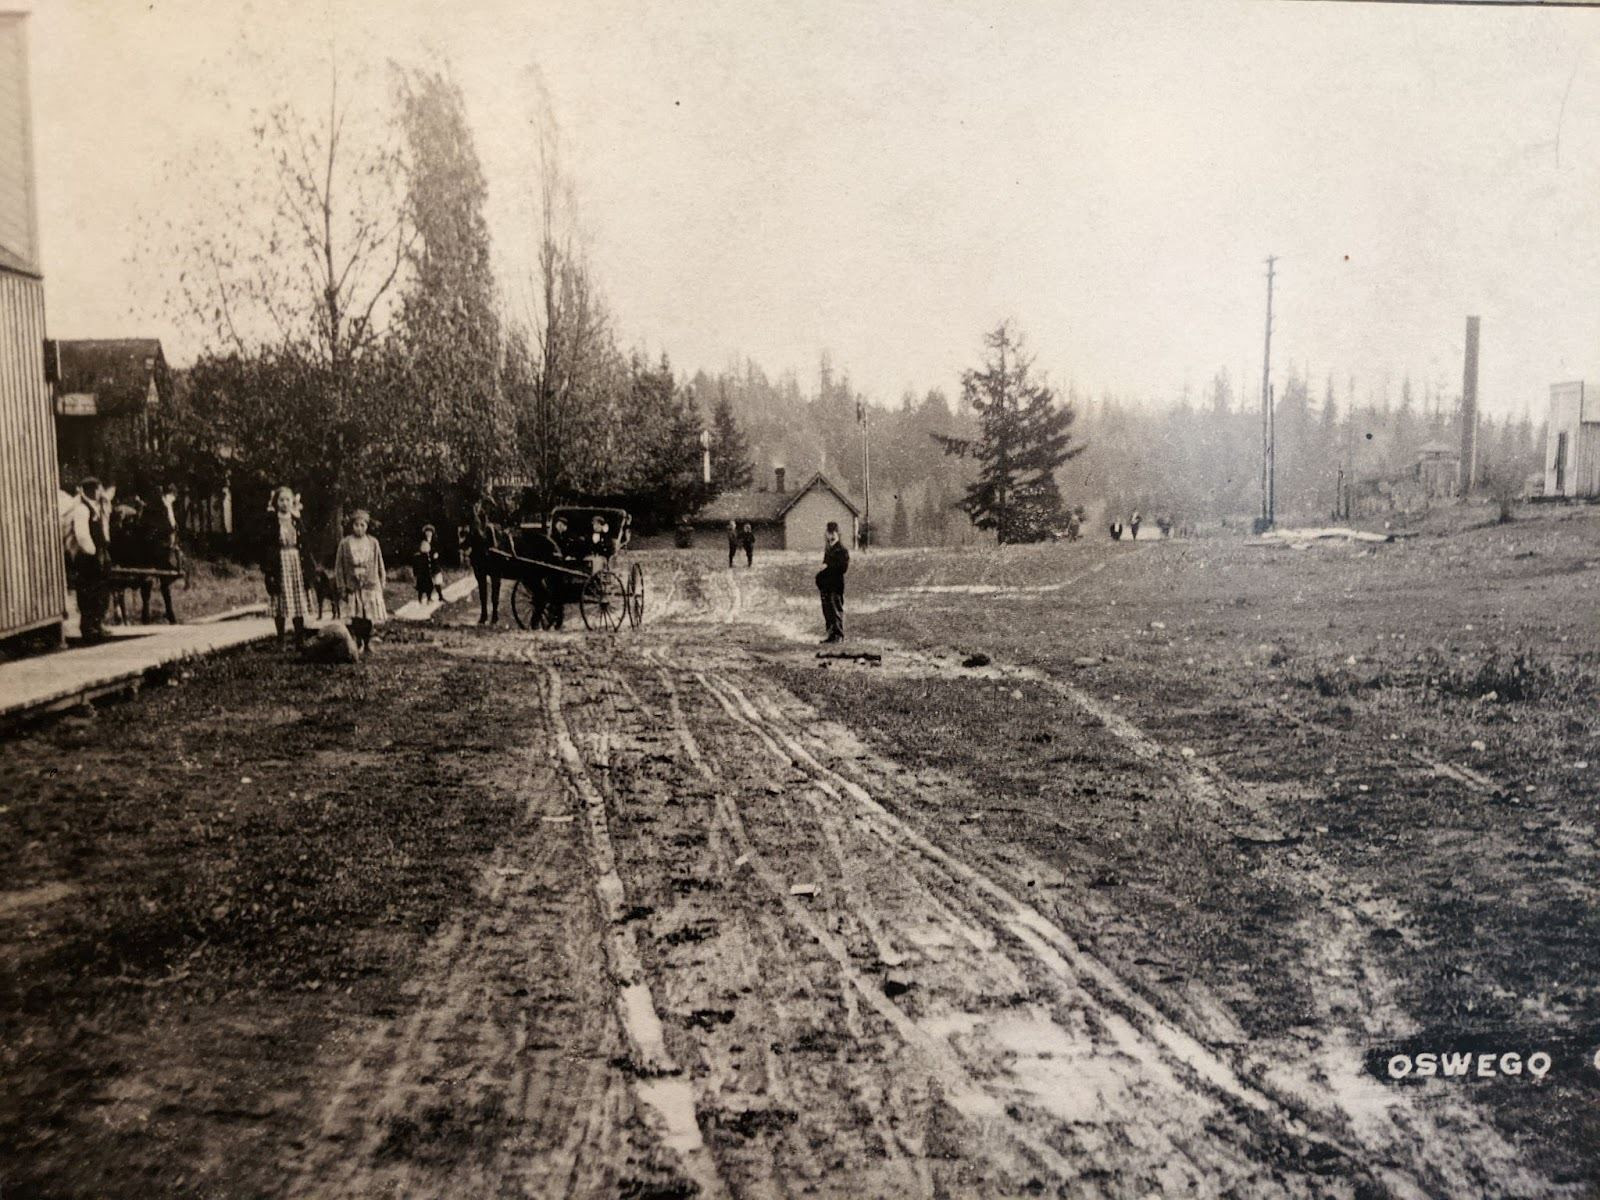 A circa 1890 street in Lake Oswego. The street is mostly mud with tracks on it. There is a coach being pulled by a horse and several people around.